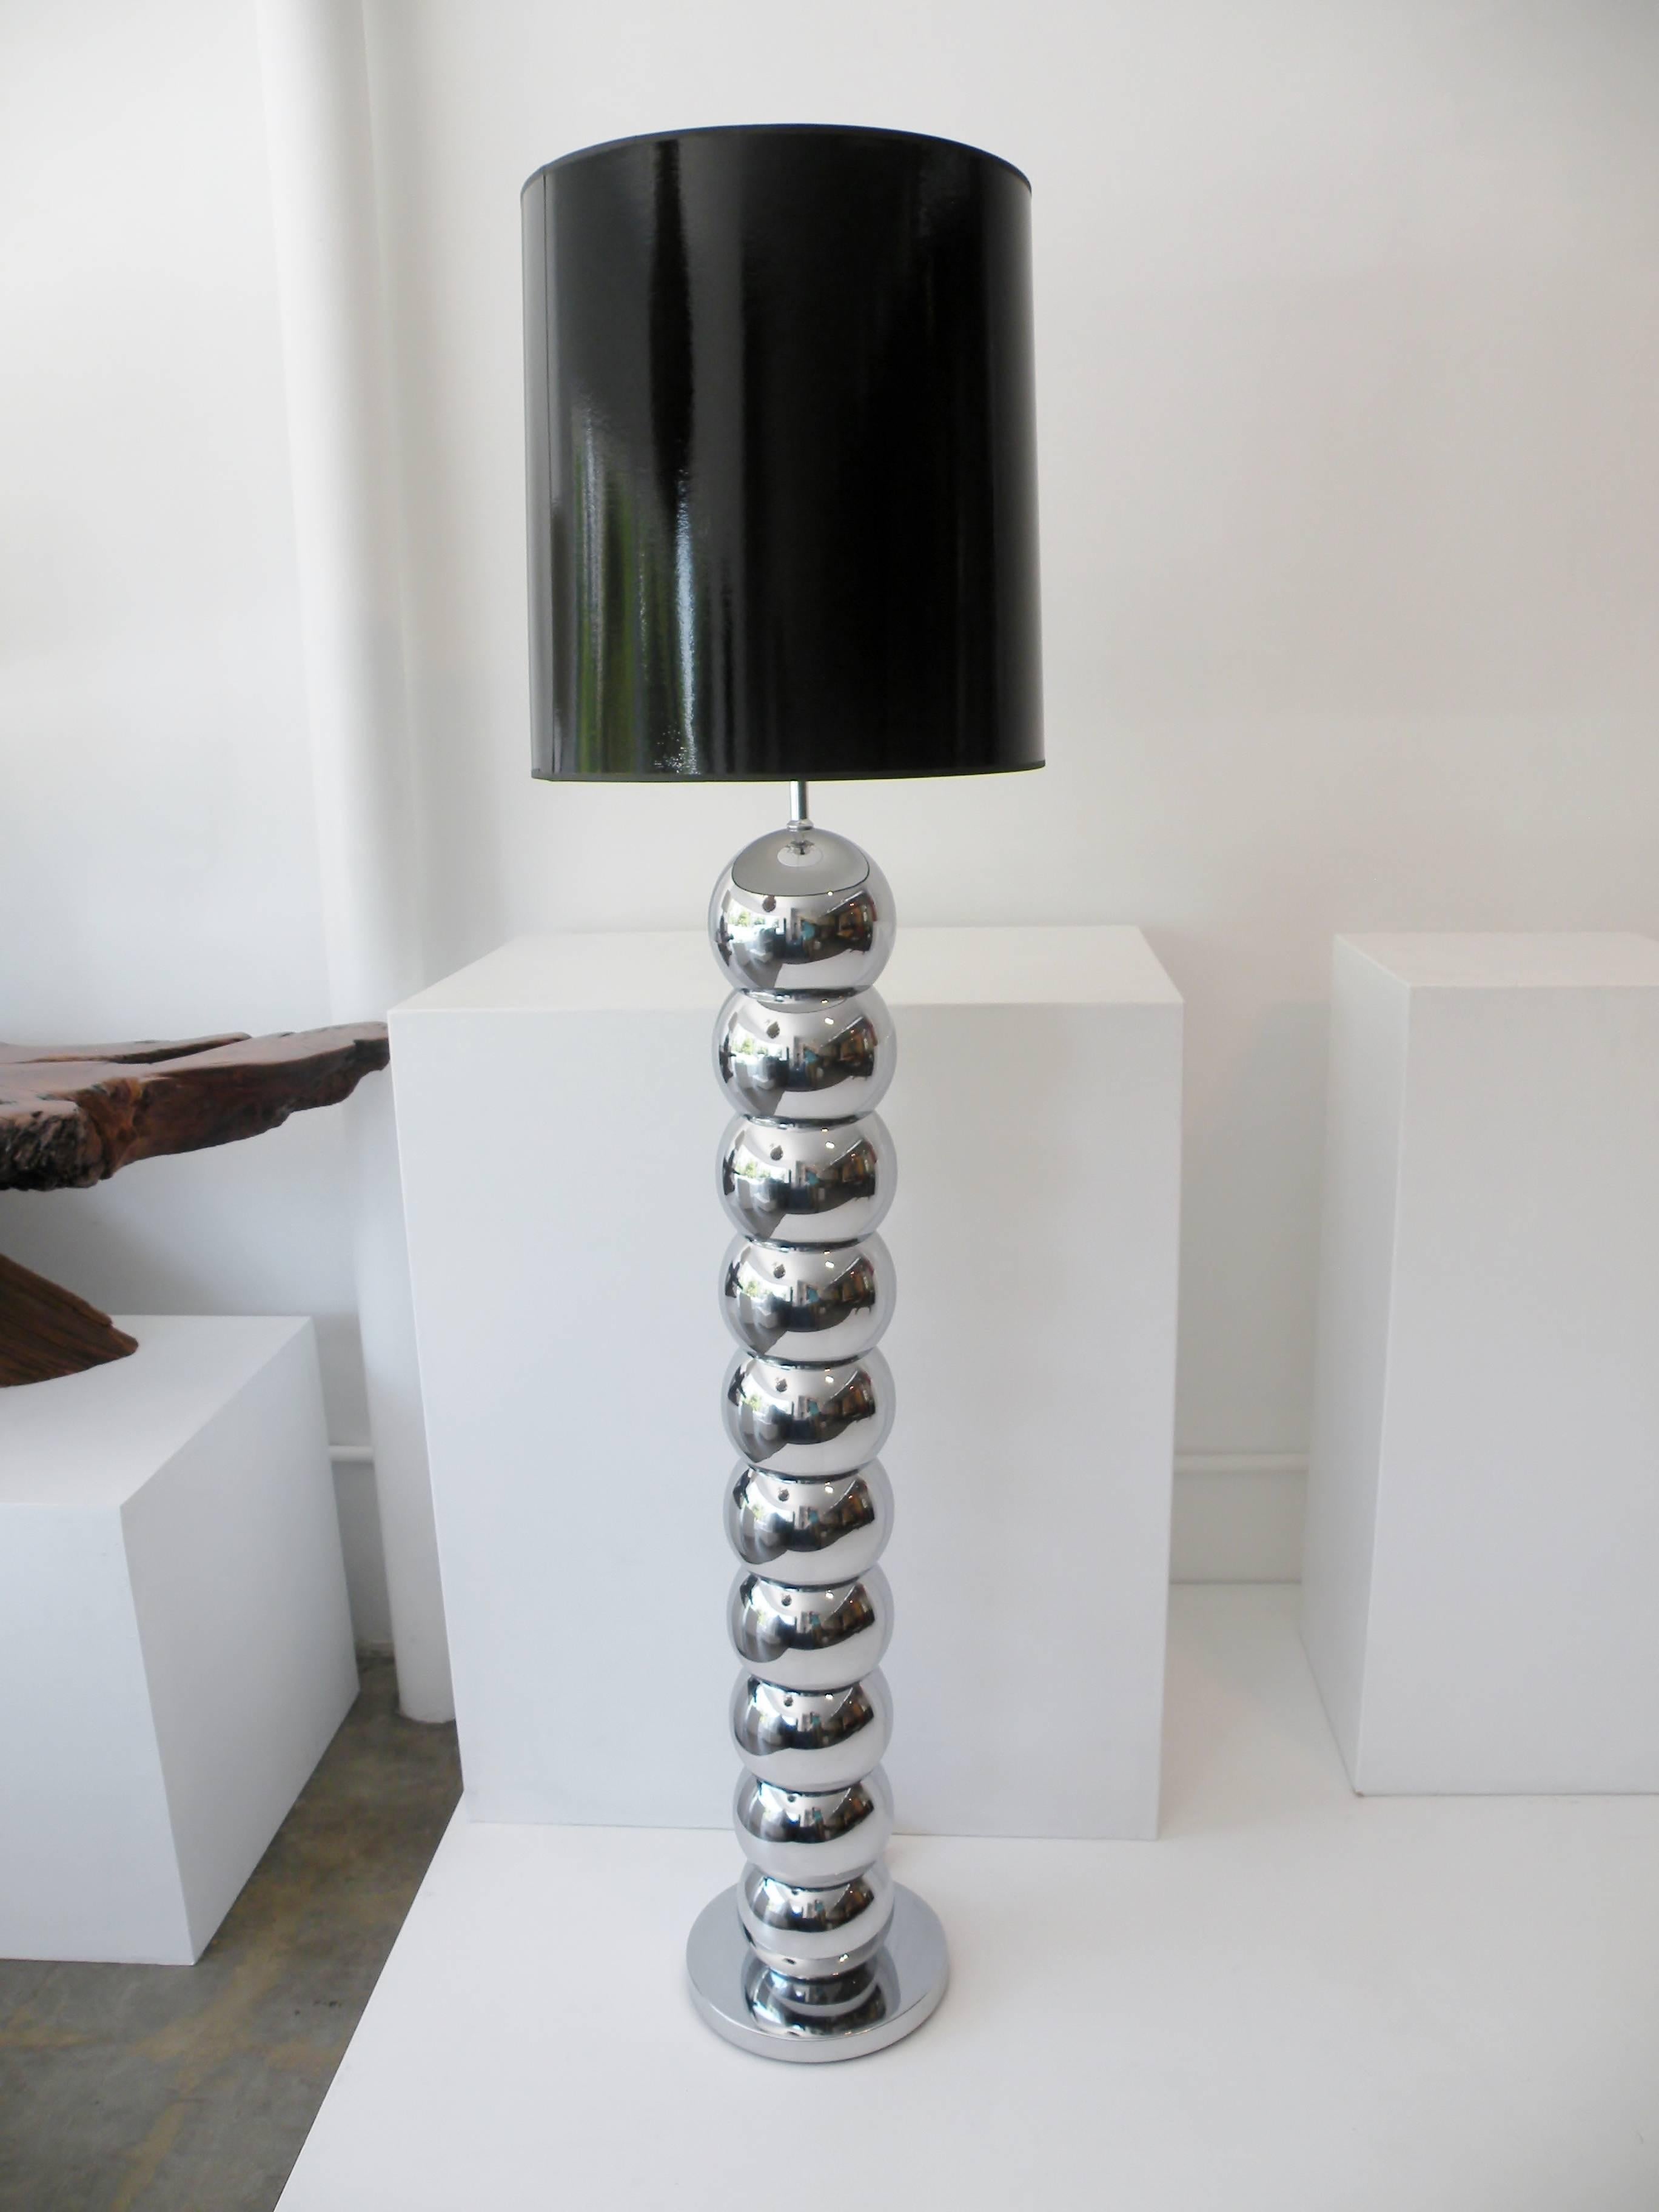 Iconic 1970s George Kovacs stacked chrome ball floor lamp. Includes original glossy black paper shade. Measure: Body of the lamp is 44